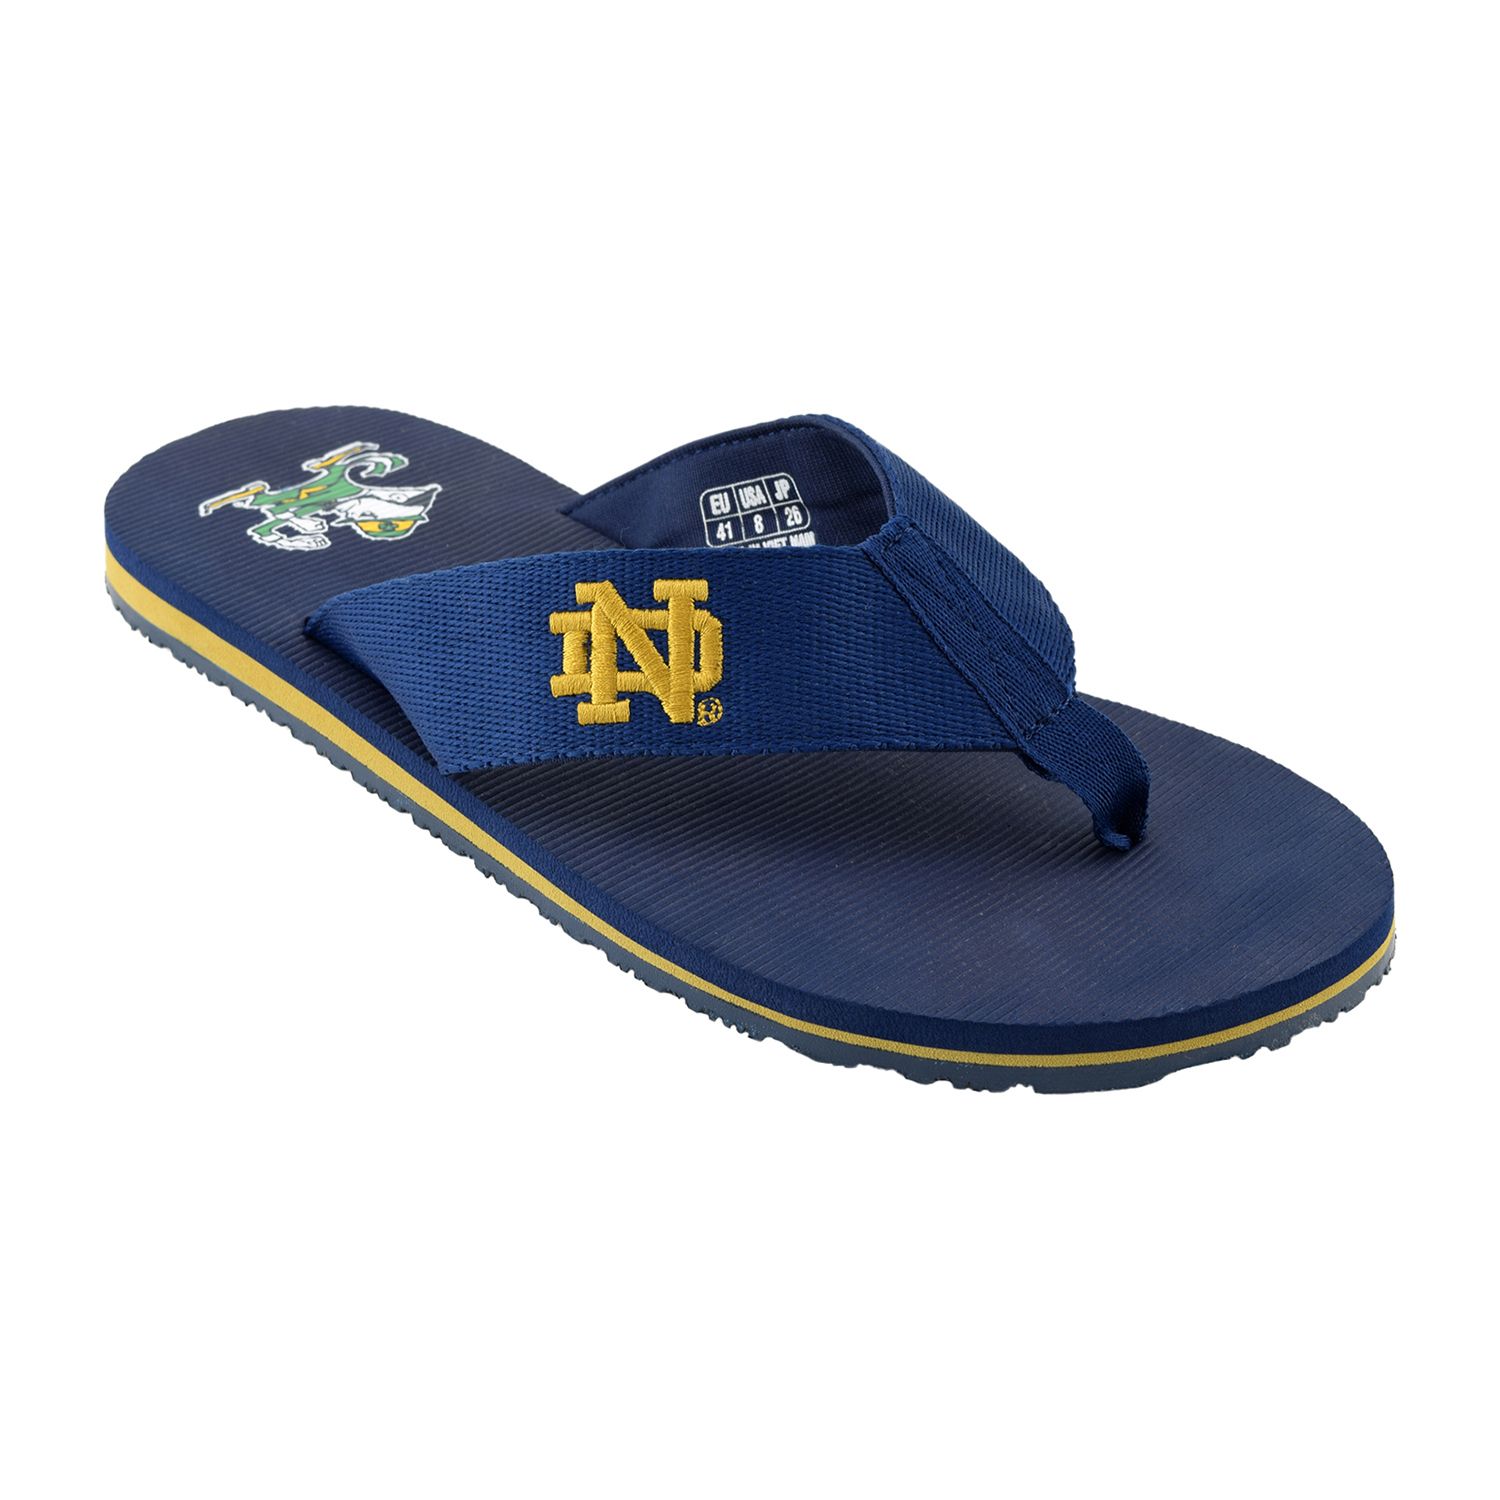 notre dame moccasin slippers